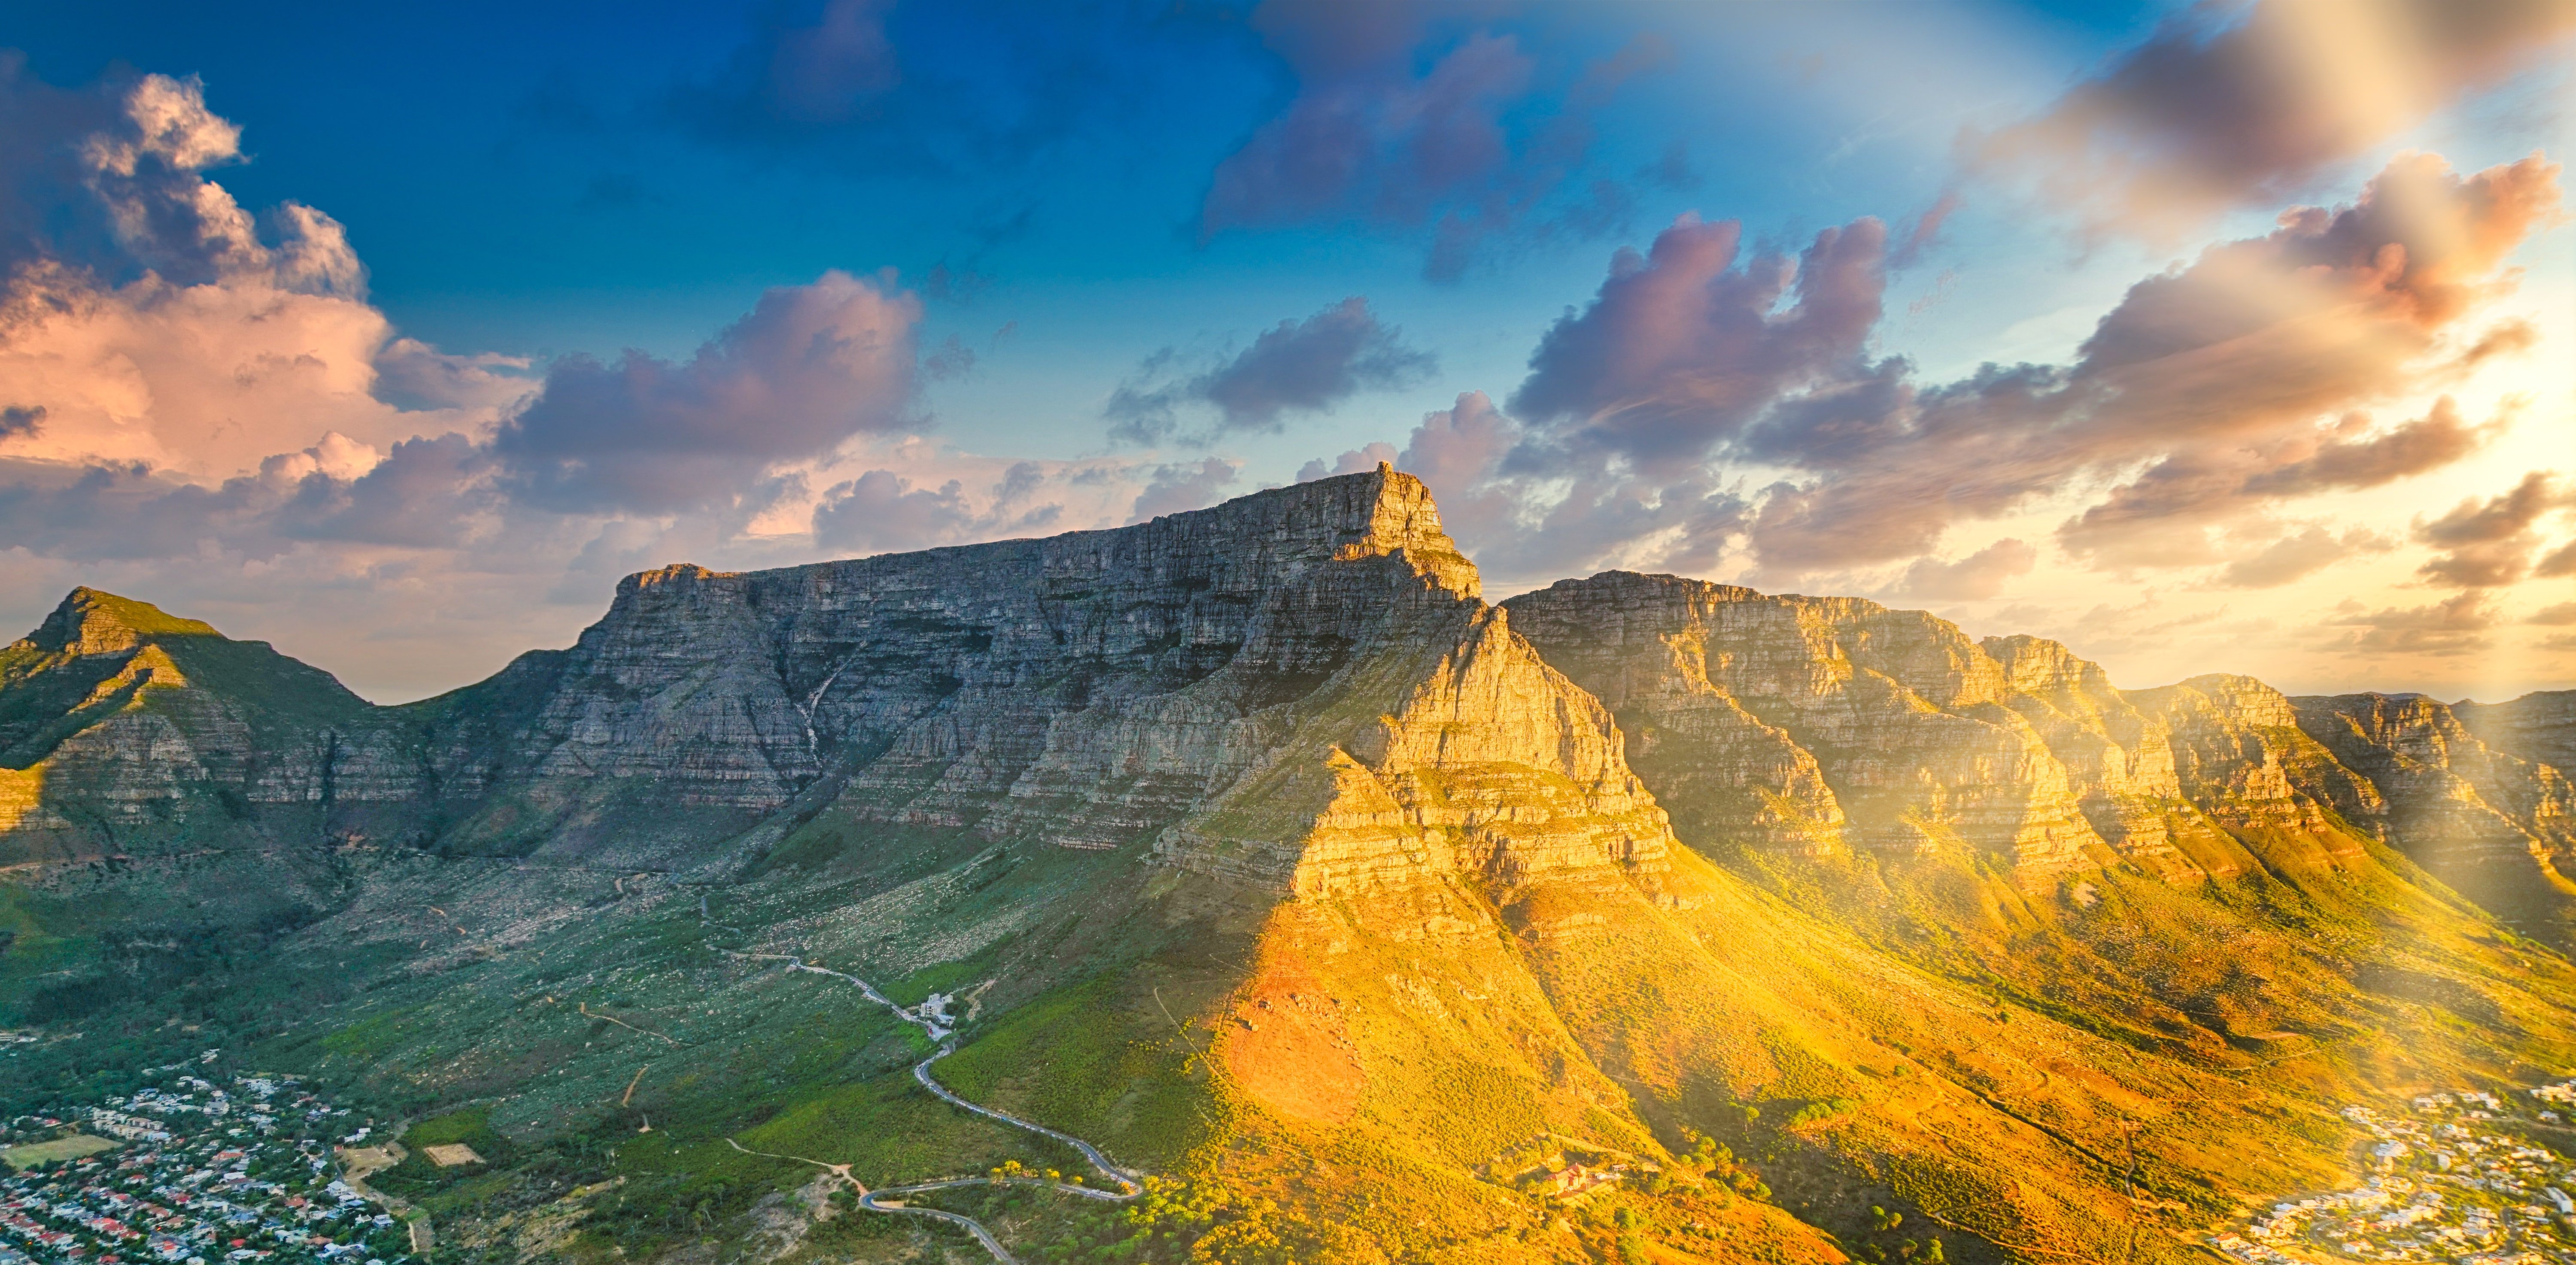 Table Mountain in South Africa.